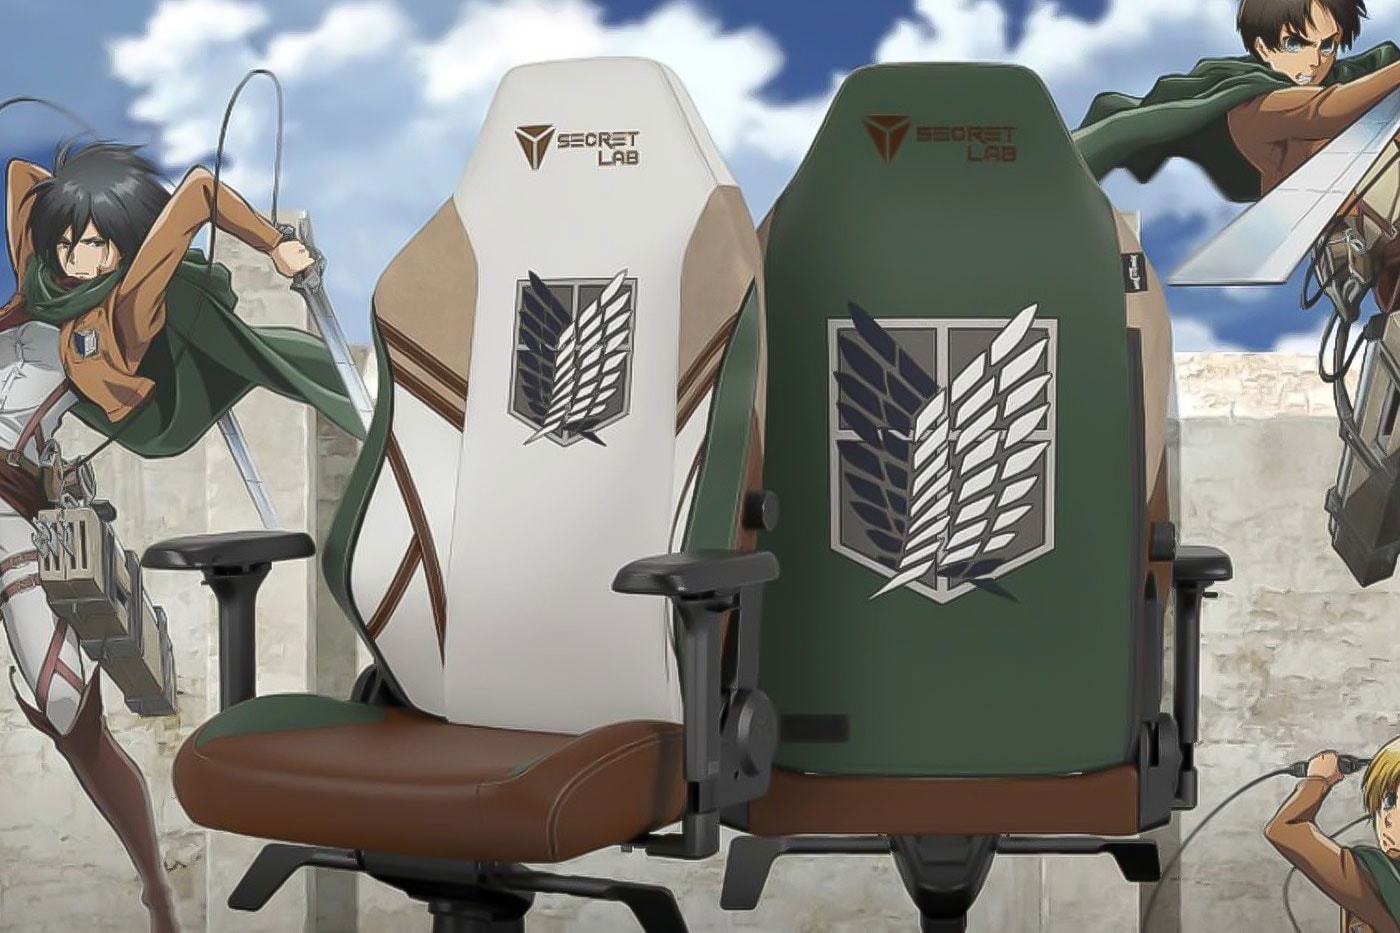 Attack on Titan Secretlab gaming chair scouts regiment embroidery leatherette wipes pack brown white green release info